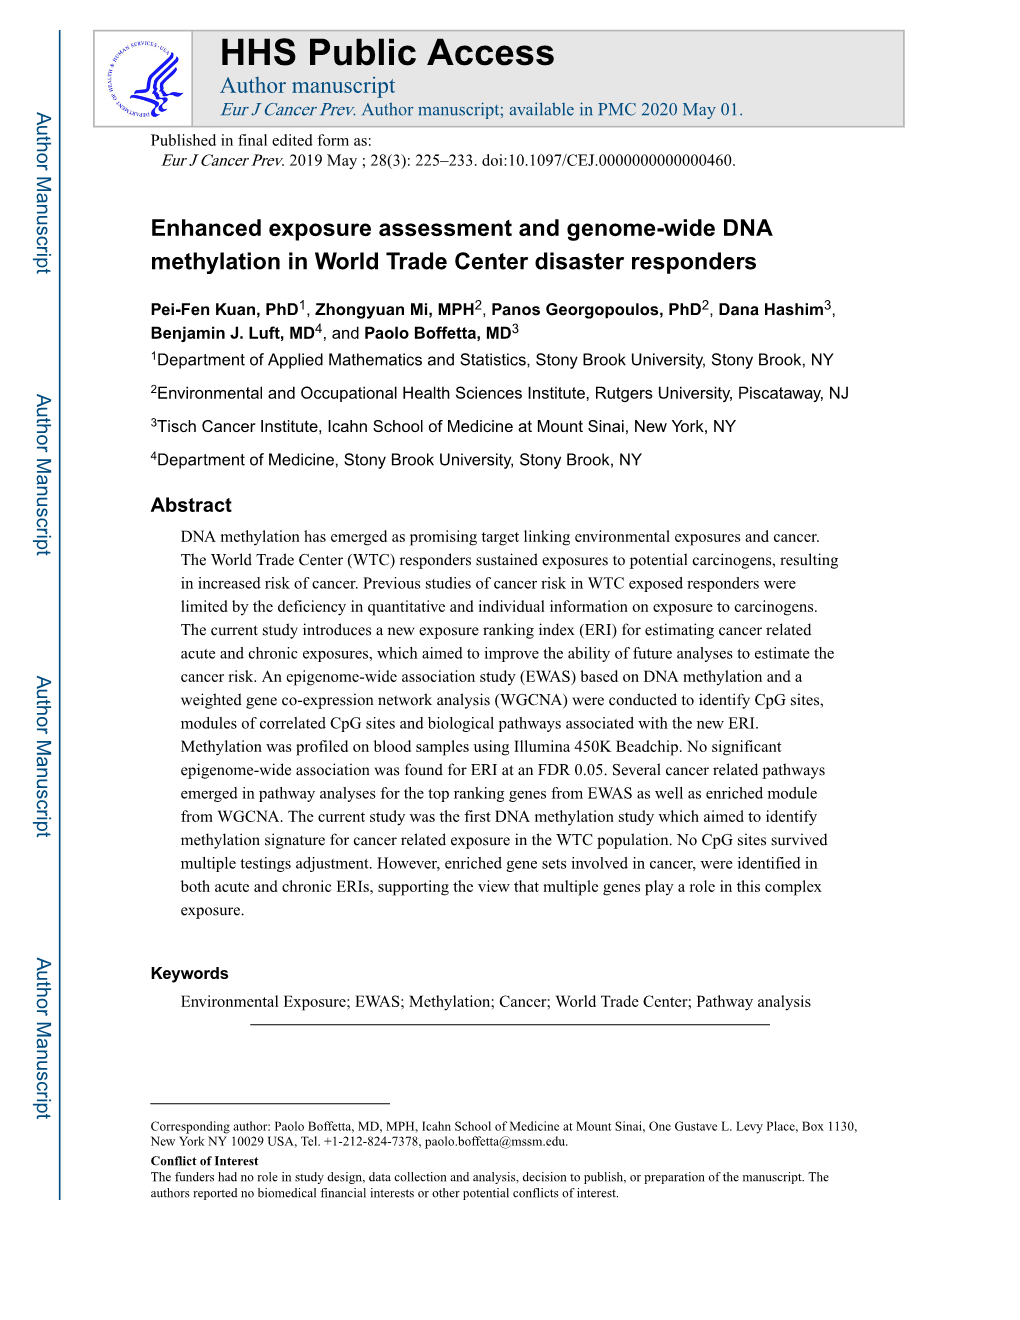 Enhanced Exposure Assessment and Genome-Wide DNA Methylation in World Trade Center Disaster Responders